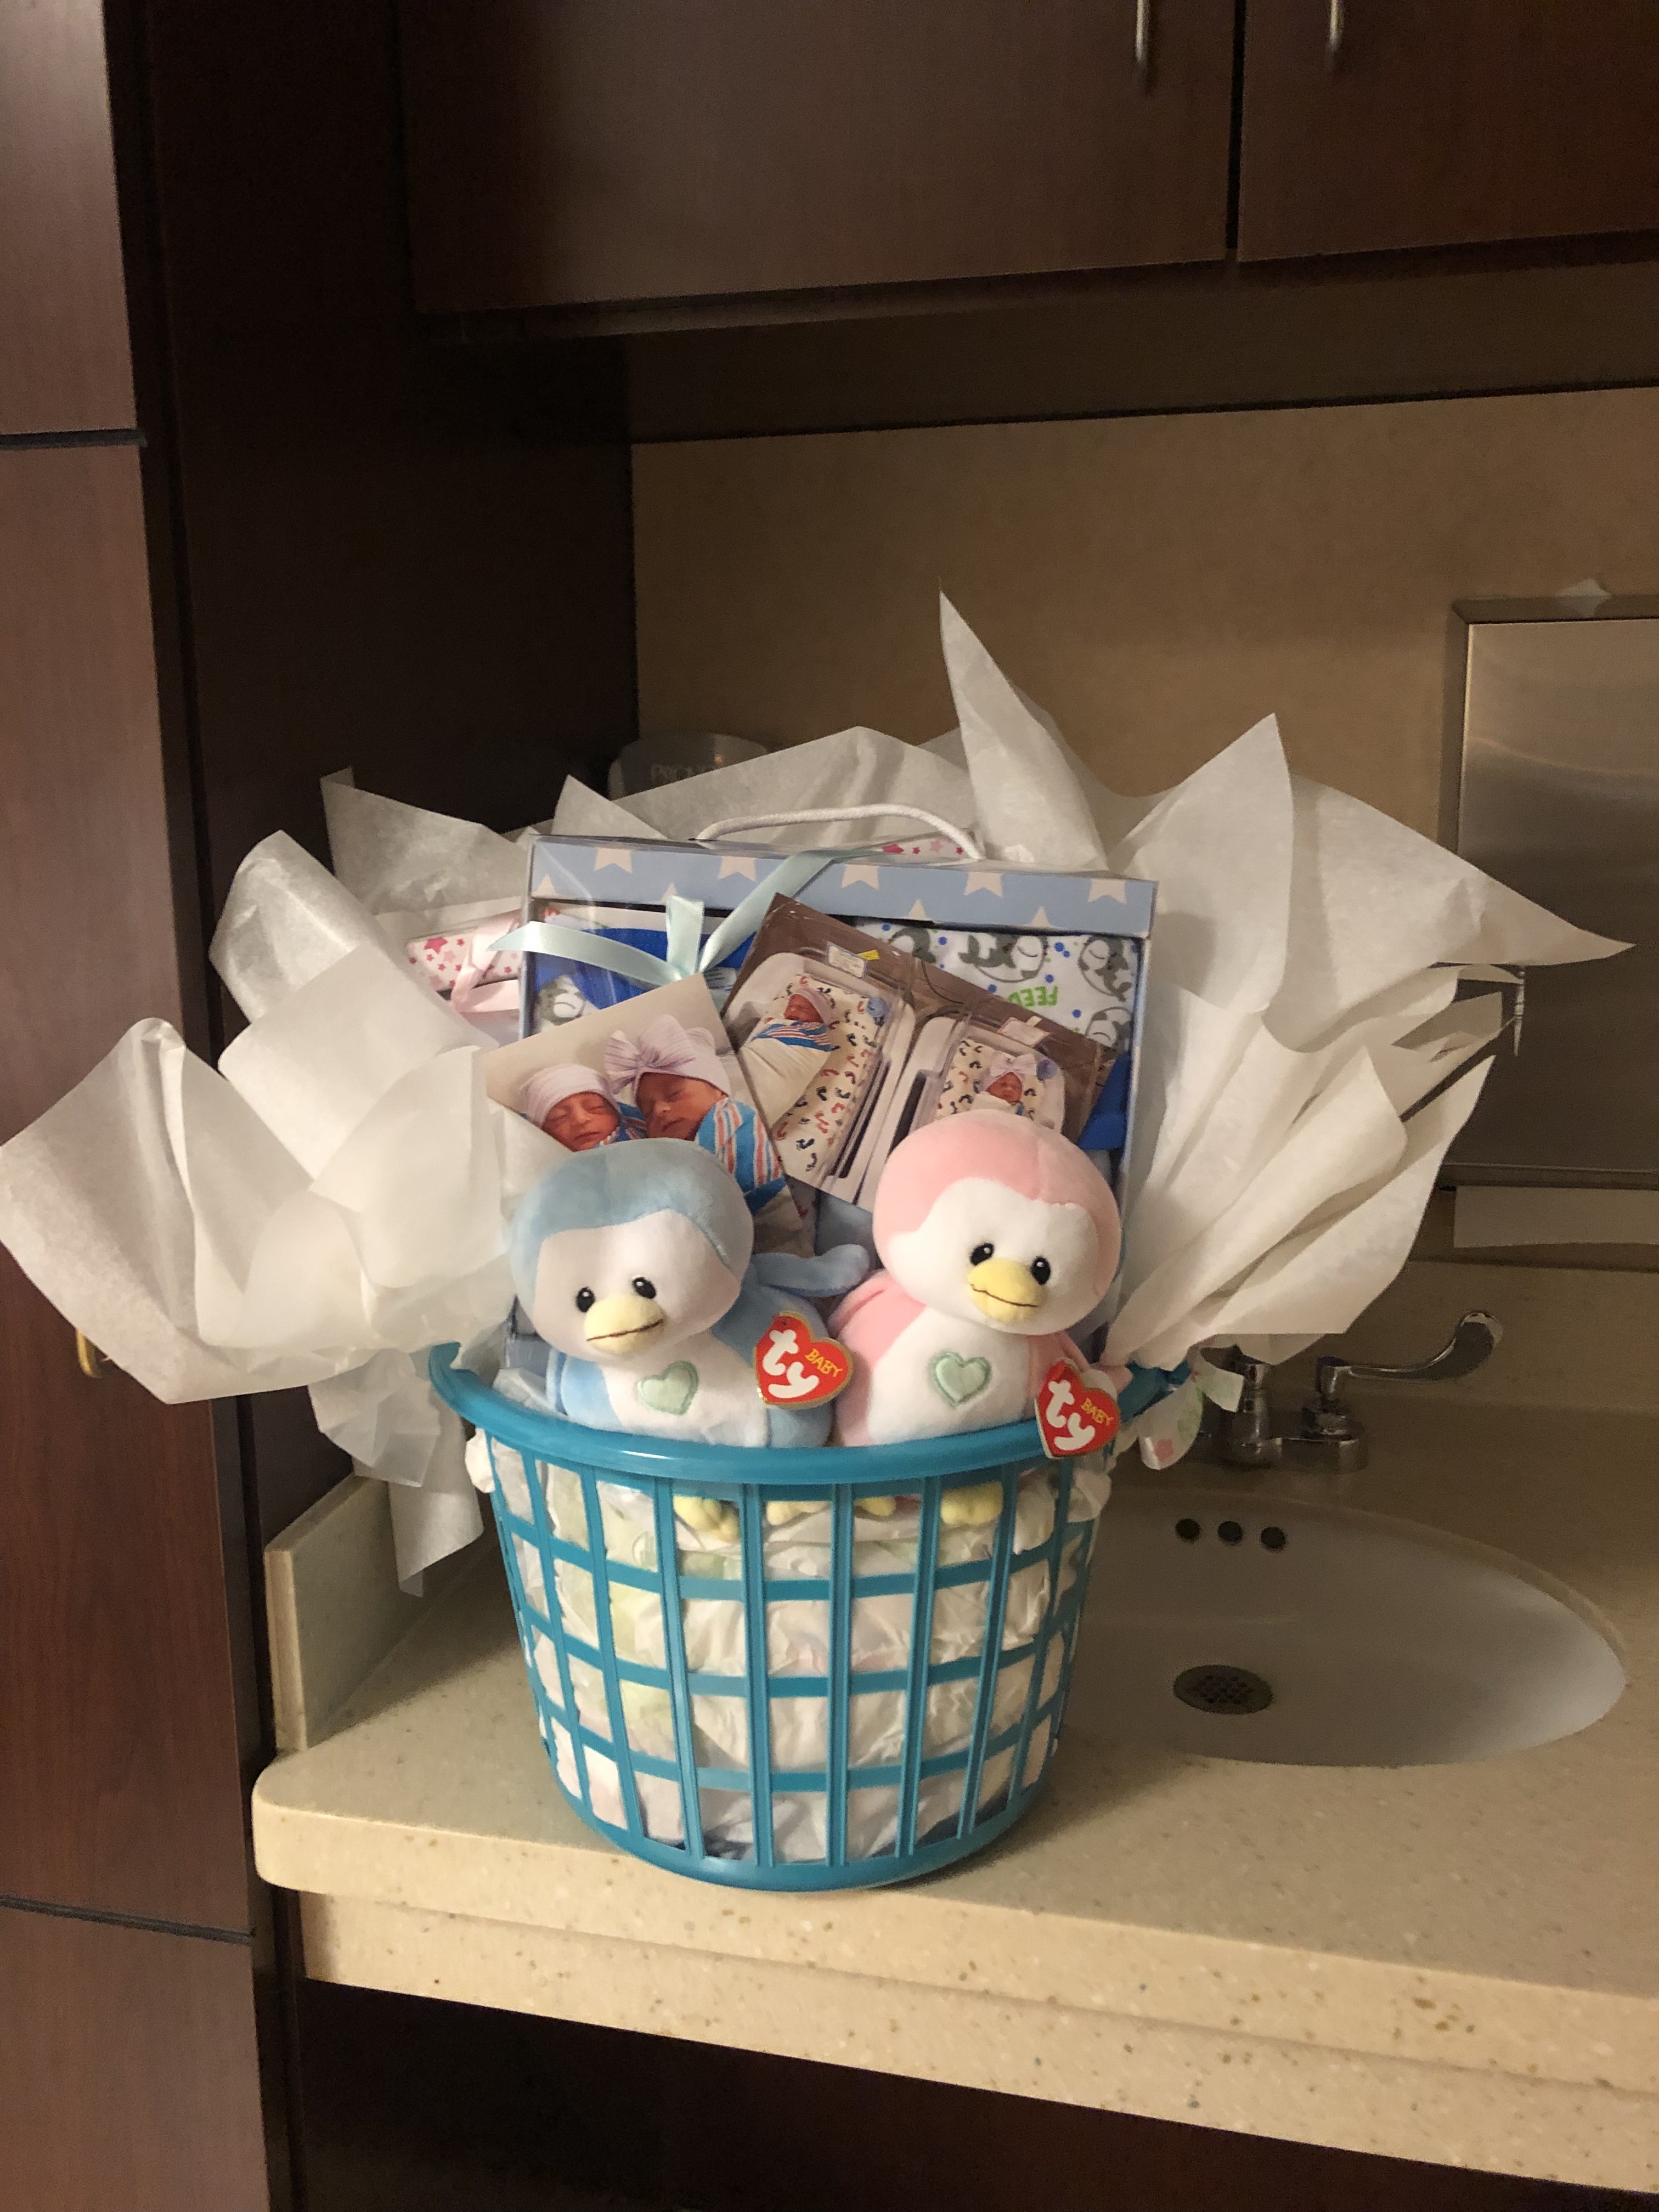 2-22-22 Twins gift basket gifted by The Medical Center staff